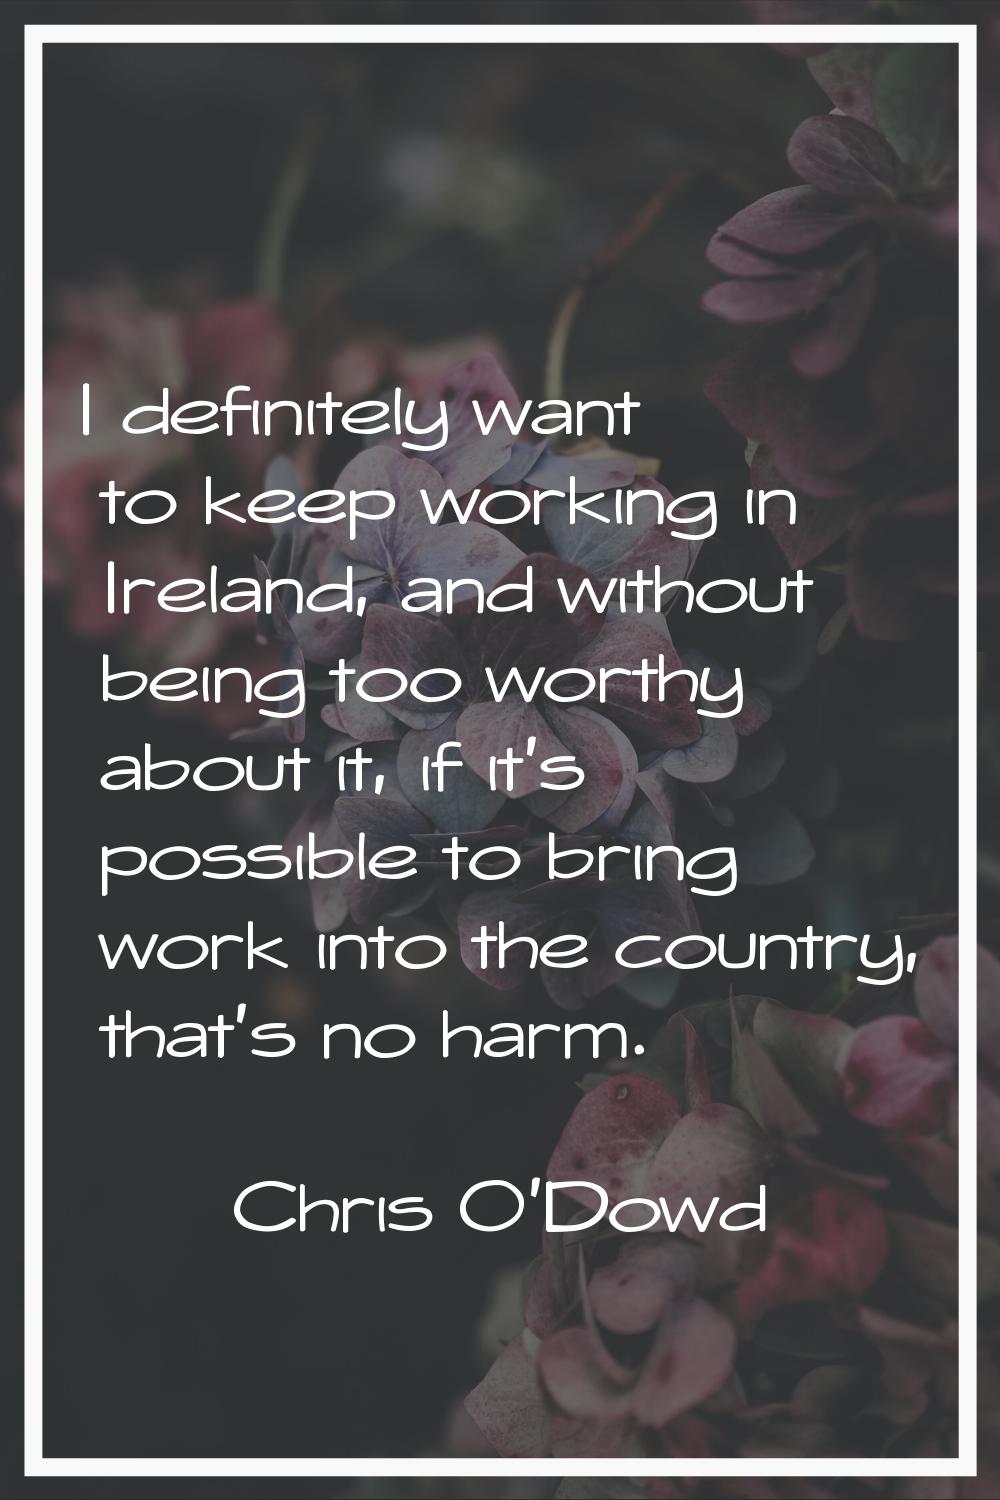 I definitely want to keep working in Ireland, and without being too worthy about it, if it's possib